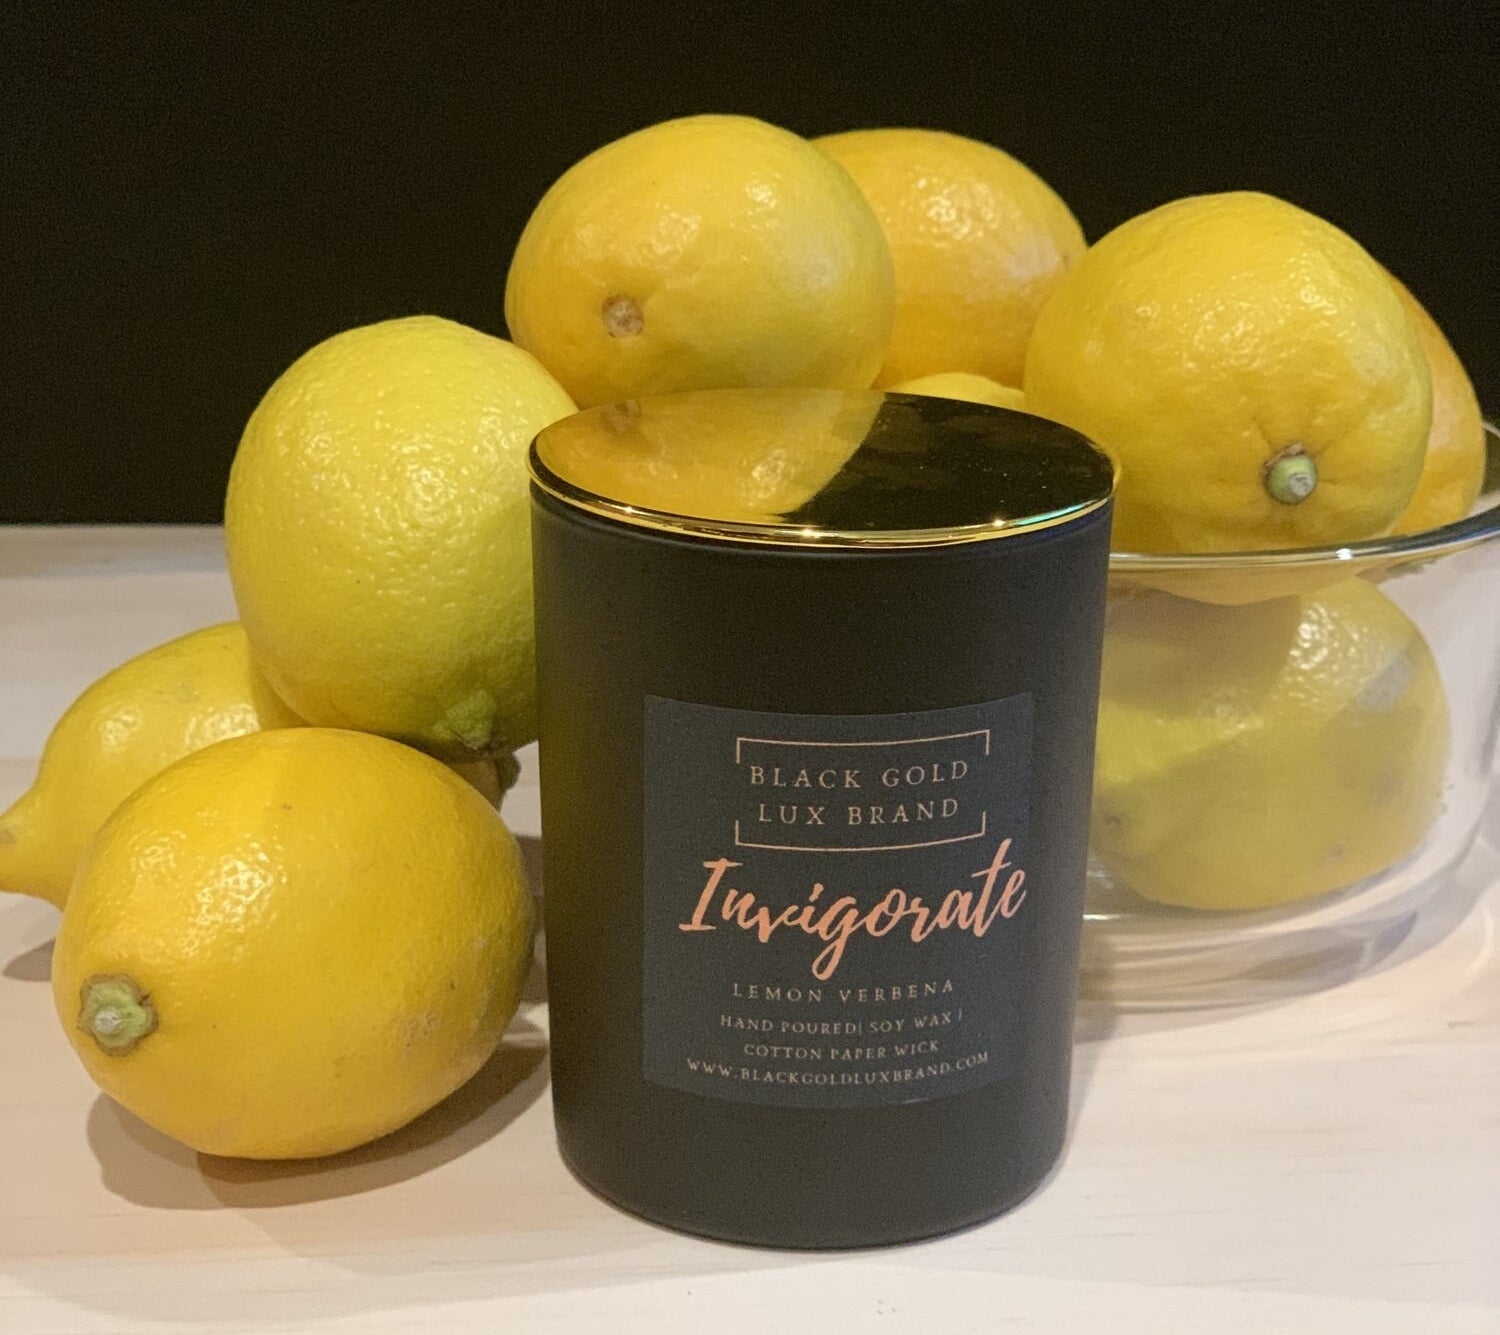 The Invigorate Candle surrounded by a bowl of lemons